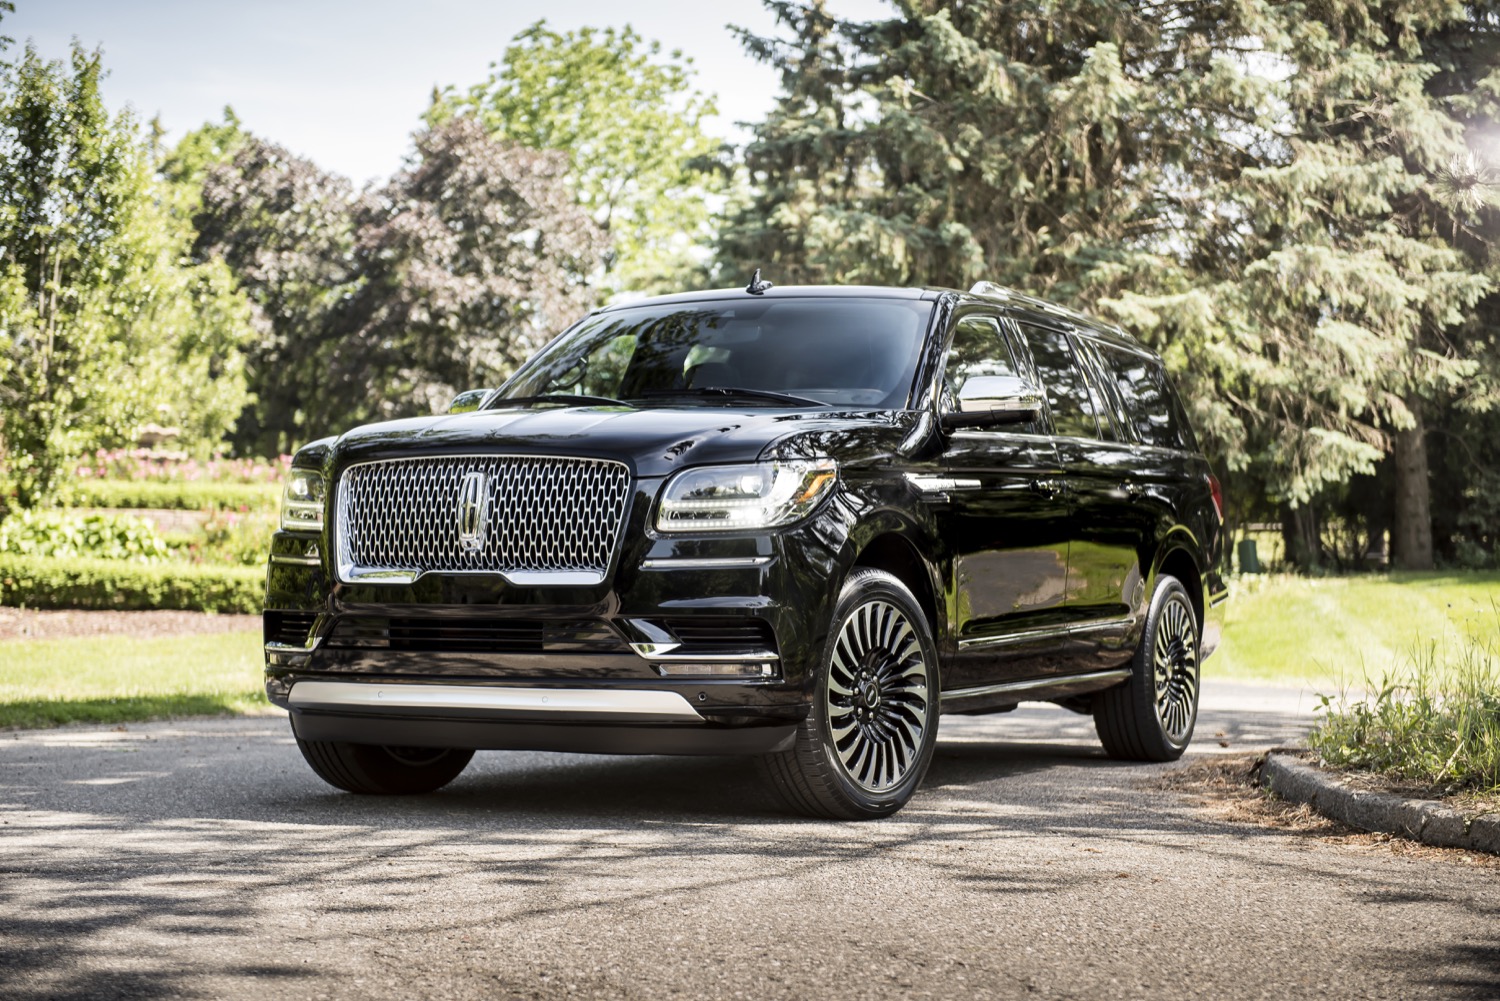 Used Lincoln Navigator L Prices Make It A Better Buy Over New